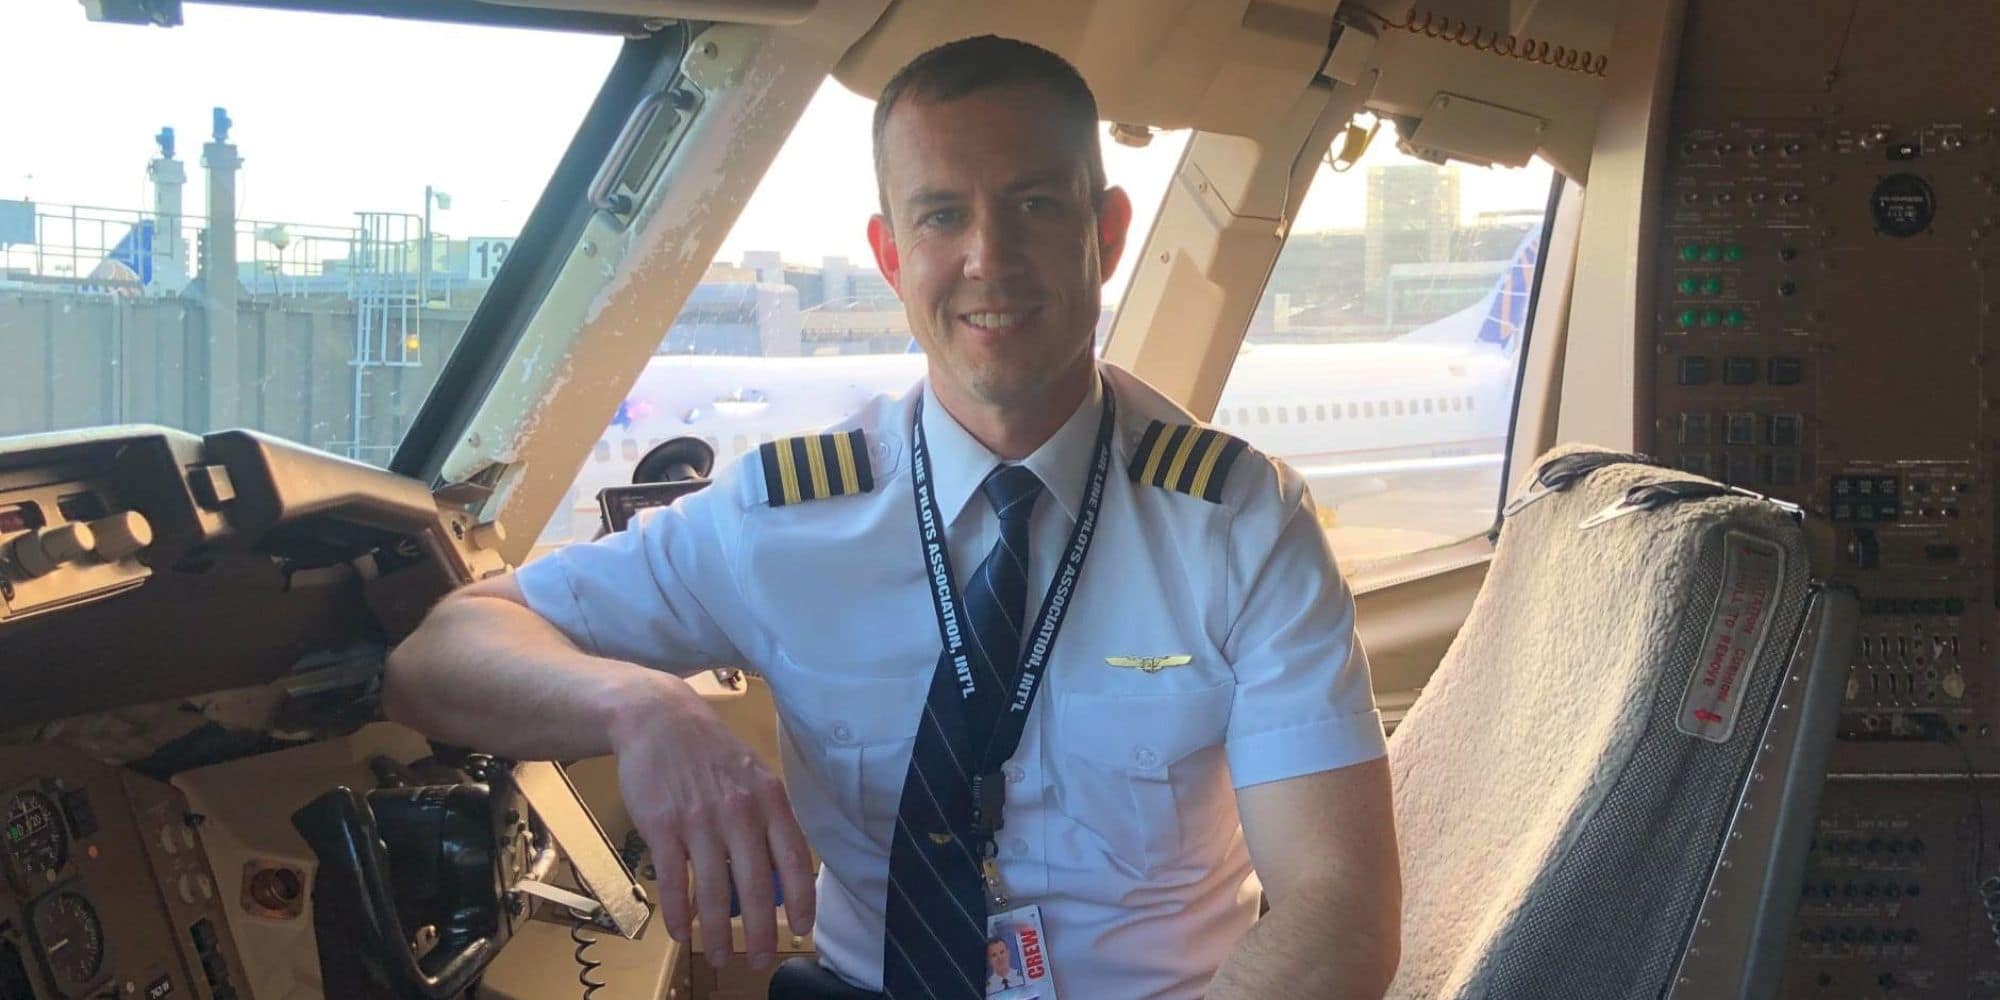 Alumnus Chris Welch has resumed his career flying for a major airline as well as growing his business as head of Aviation Cookie Company.